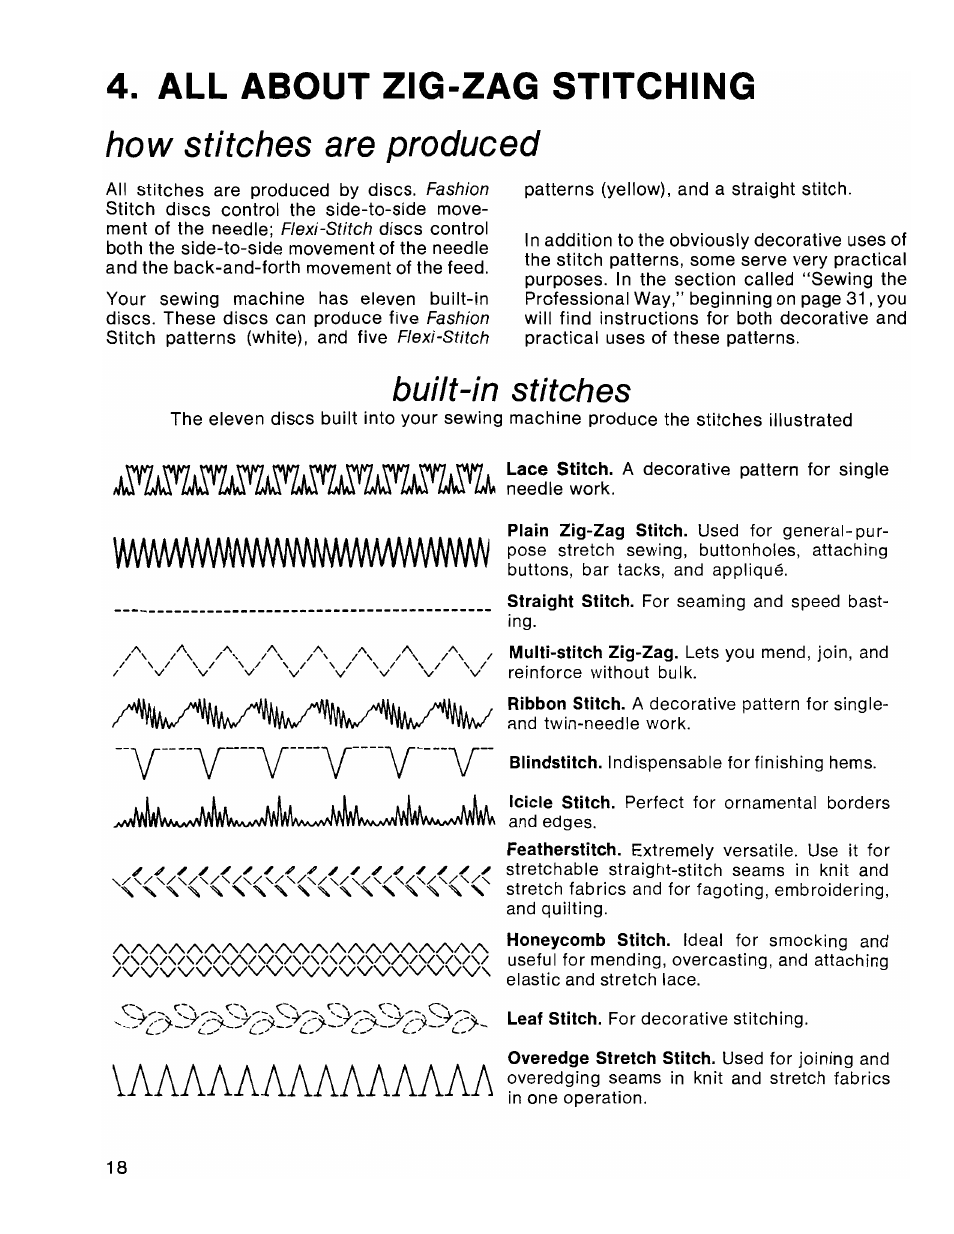 All about zig-zag stitching, Built-in stitches, How stitches are produced | SINGER 1036 Creative Touch User Manual | Page 23 / 66